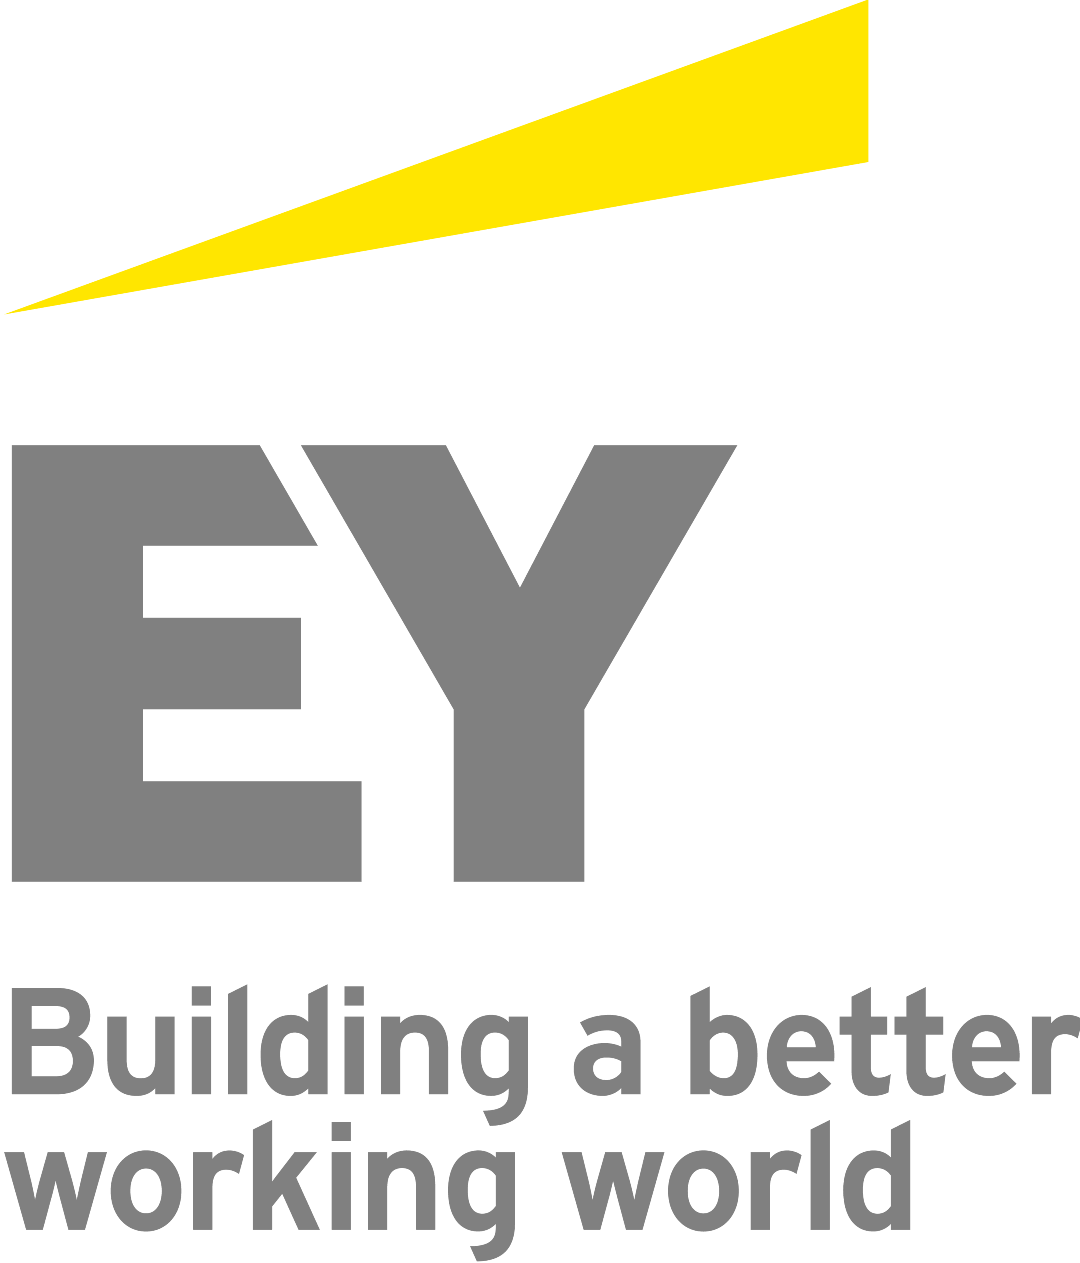 Founder/CEO of Knix named EY Entrepreneur Of The Year - Canada's